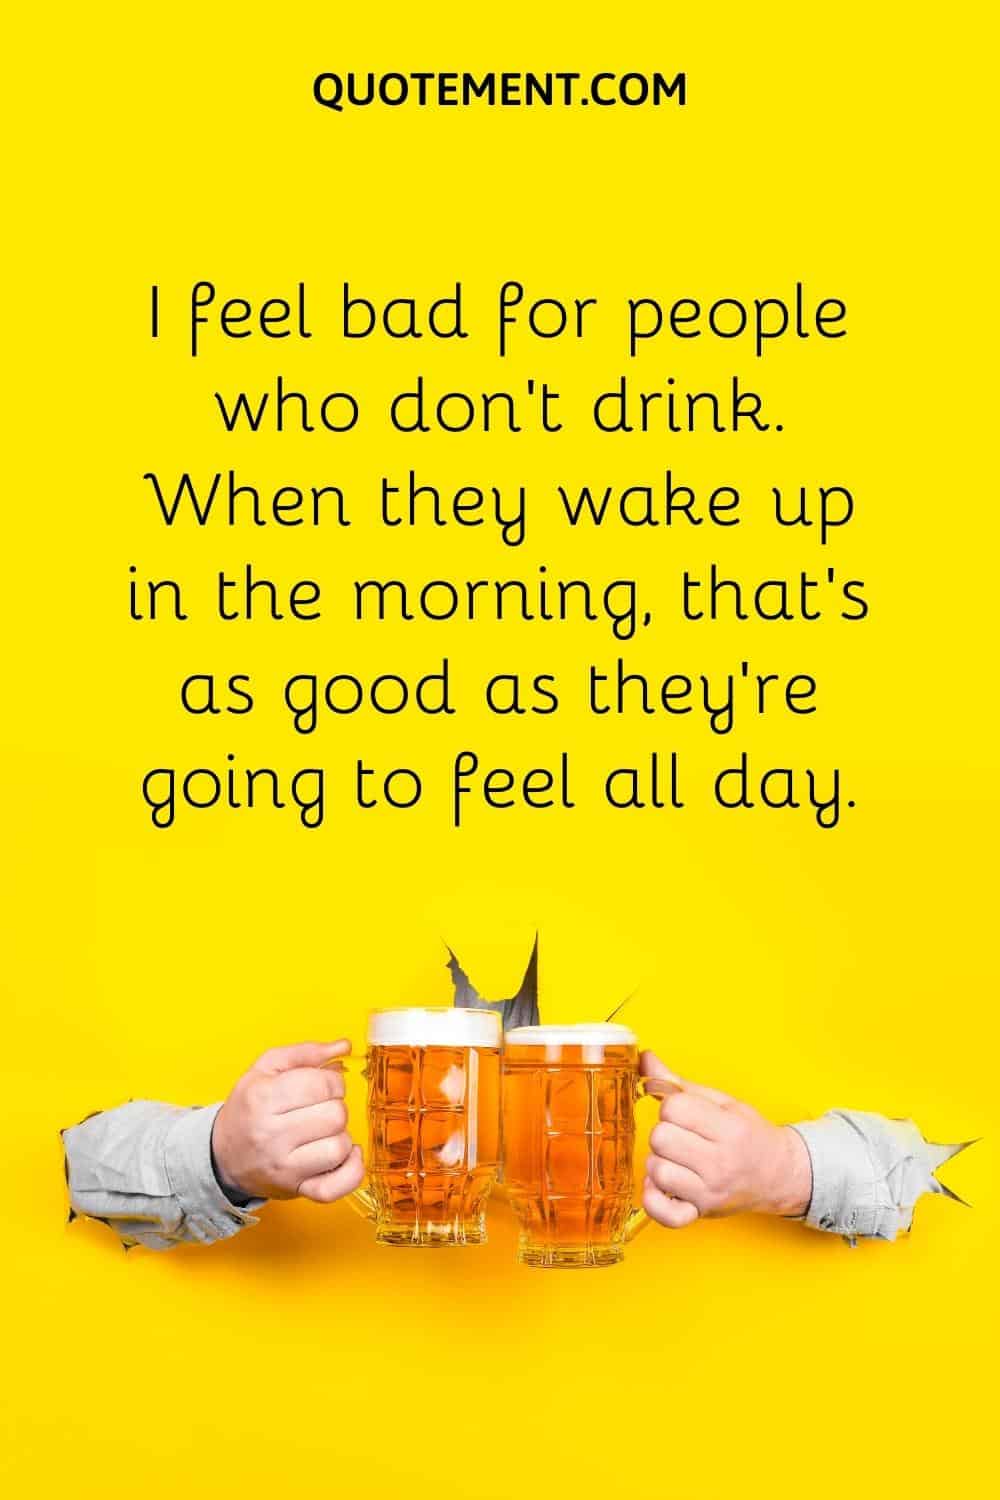 I feel bad for people who don’t drink. When they wake up in the morning, that’s as good as they’re going to feel all day.